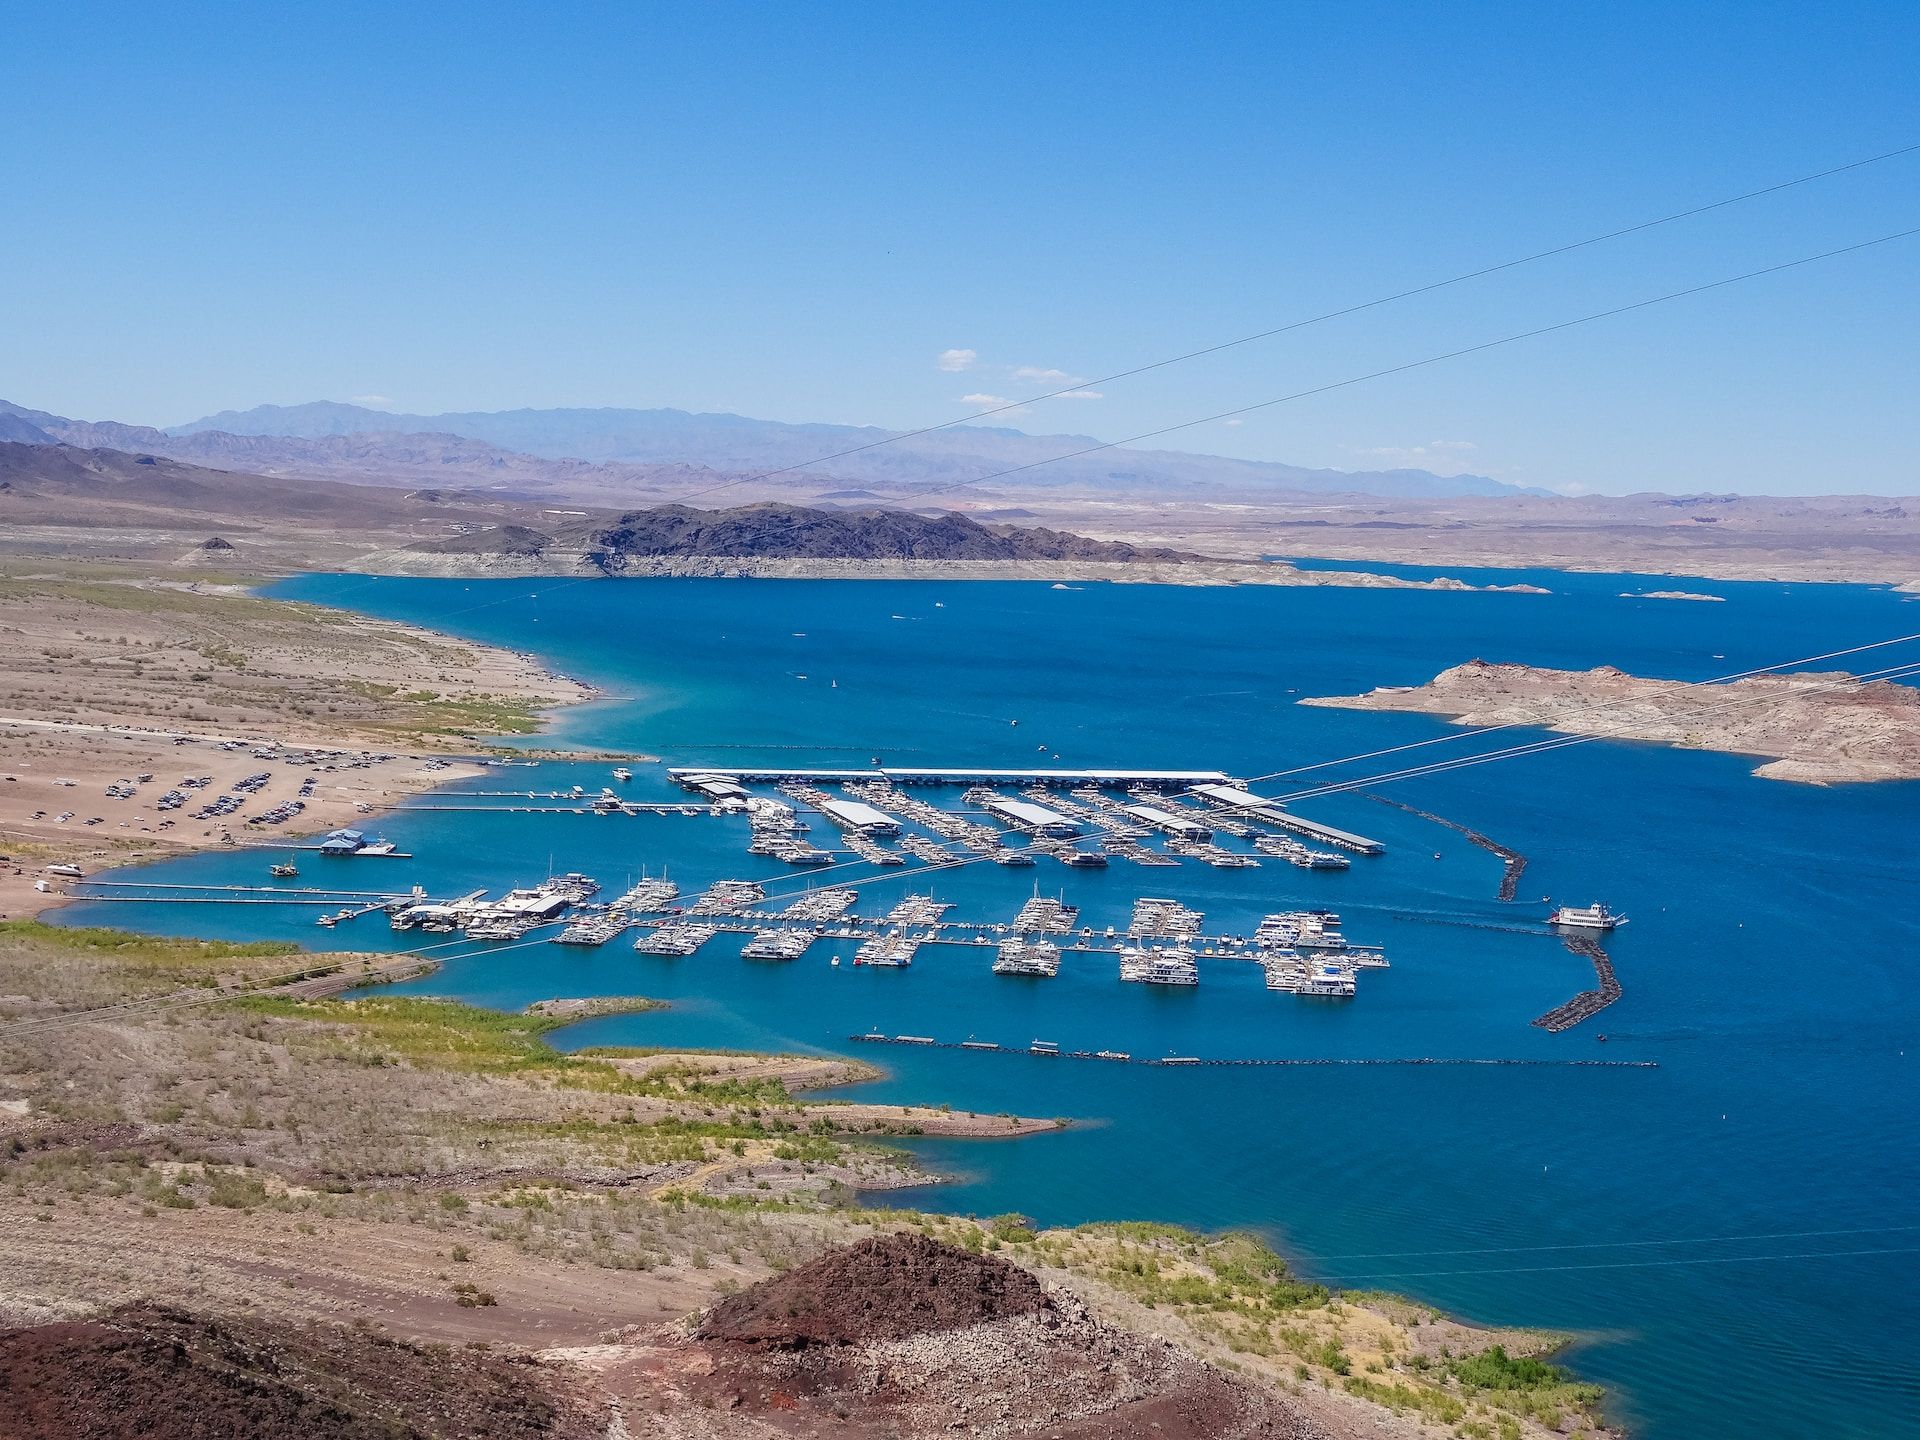 Lake Mead marina from a viewpoint above Hoover Dam, Nevada 